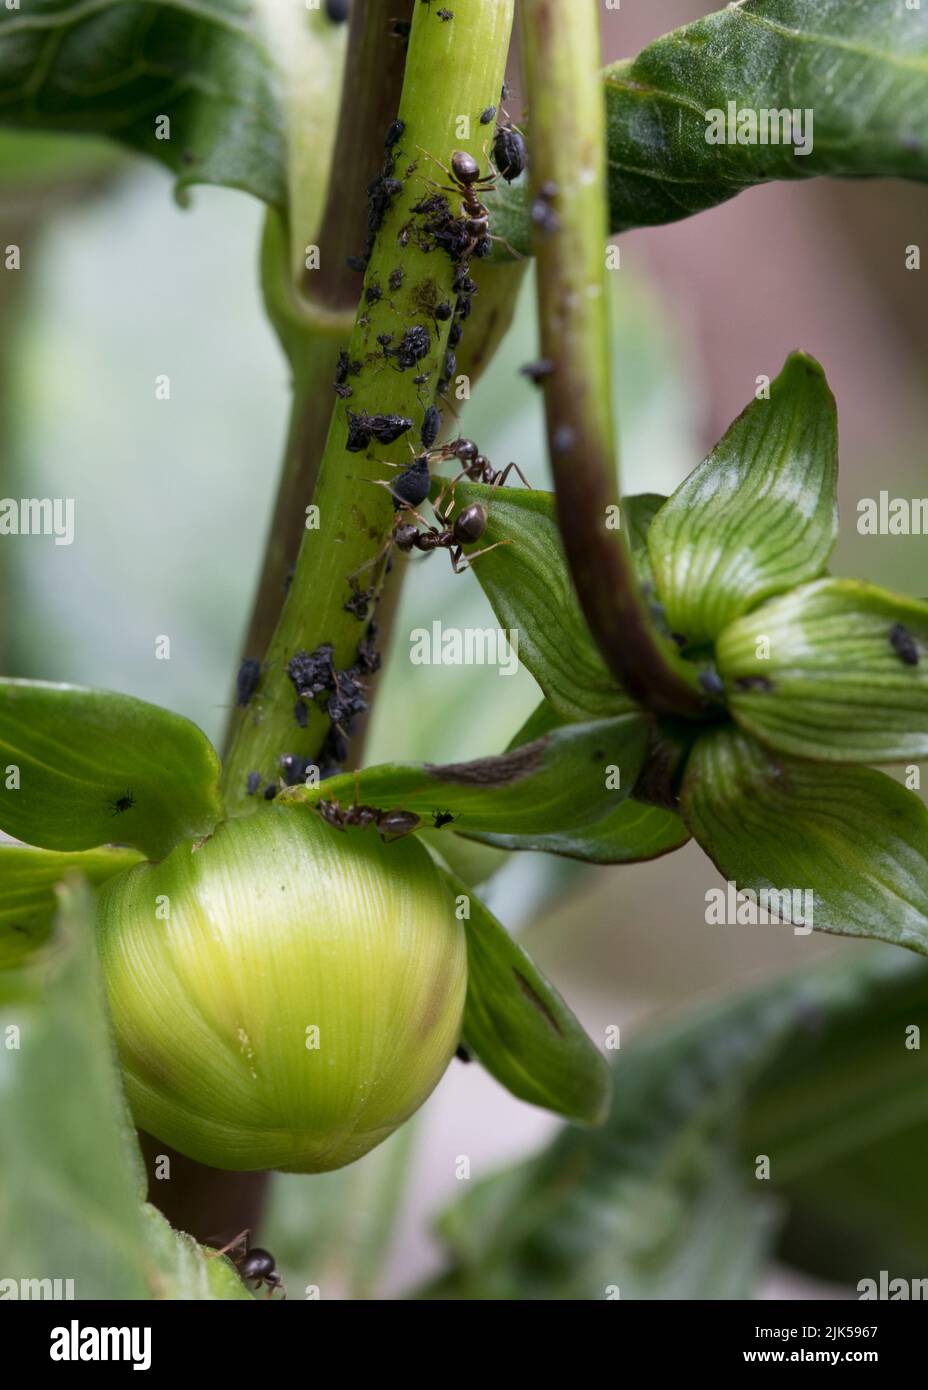 Blackfly (Black bean aphids) and farmer ants on a dahlia plant in early summer, United Kingdom Stock Photo